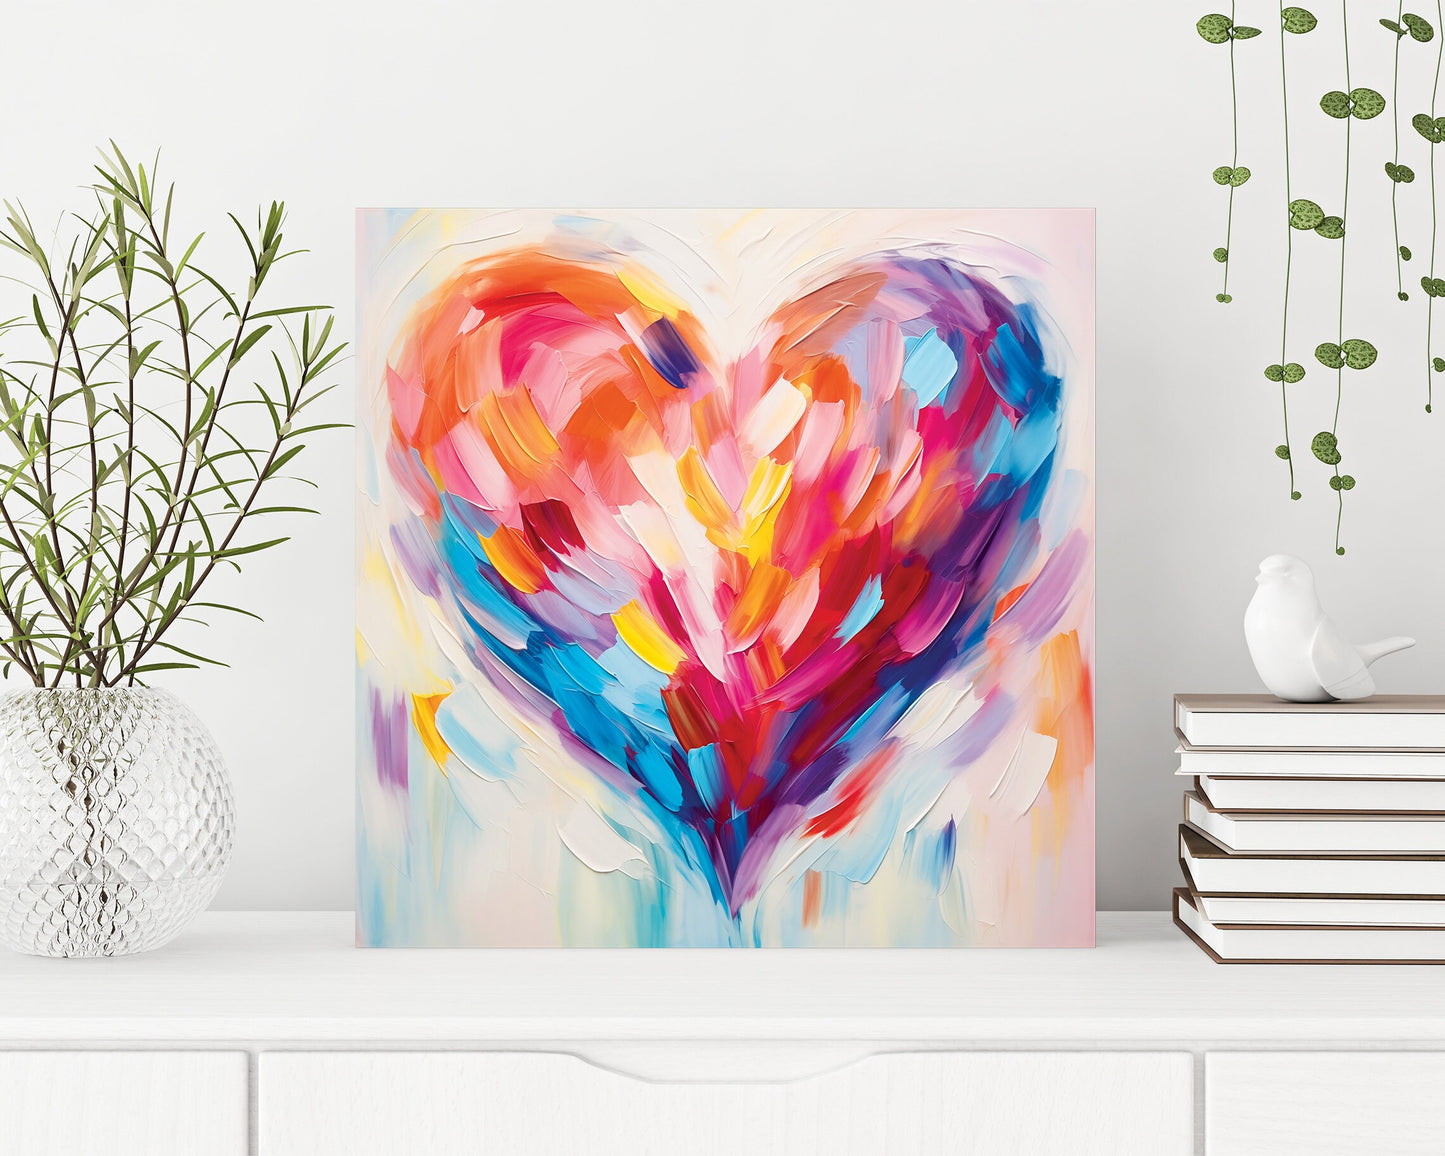 12in Oil Painting Style of a Colorful Heart Valentine__ Day UV Print Wall Canvas, Wall Canvas Printing, Living Room Decor